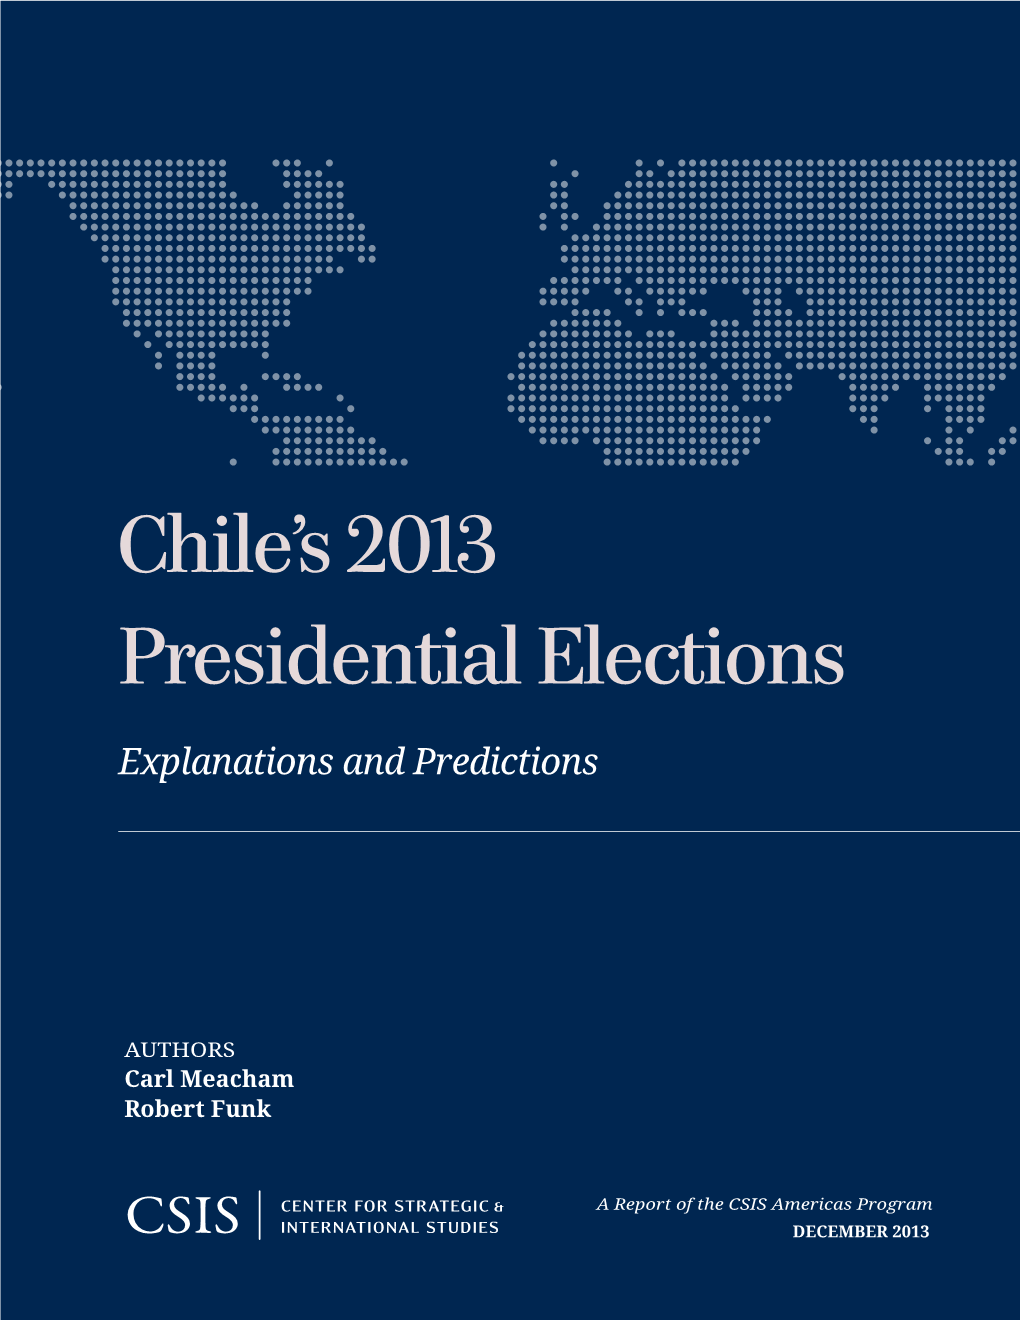 Chile's 2013 Presidential Elections